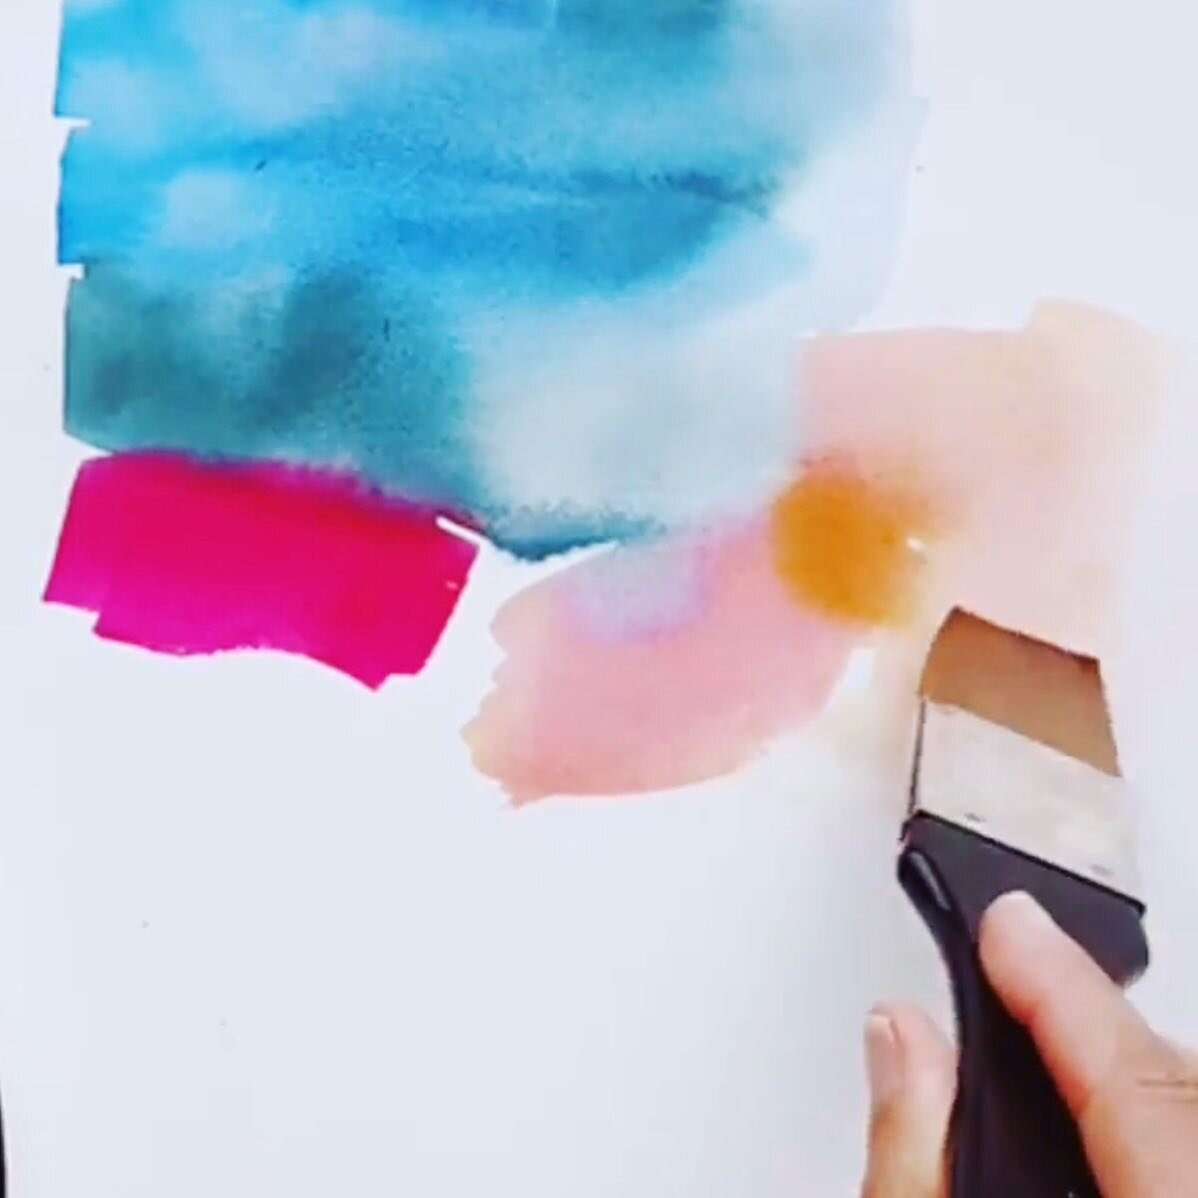 Love it when the colours come together like this! It&rsquo;s the most magical thing about watercolour. ✨✨
.
.
.
#watercolour #paint #watercolour #watercolortutorial #watercolortips #watercolorpainting #painting #paintingtips #art #artistsoninstagram 